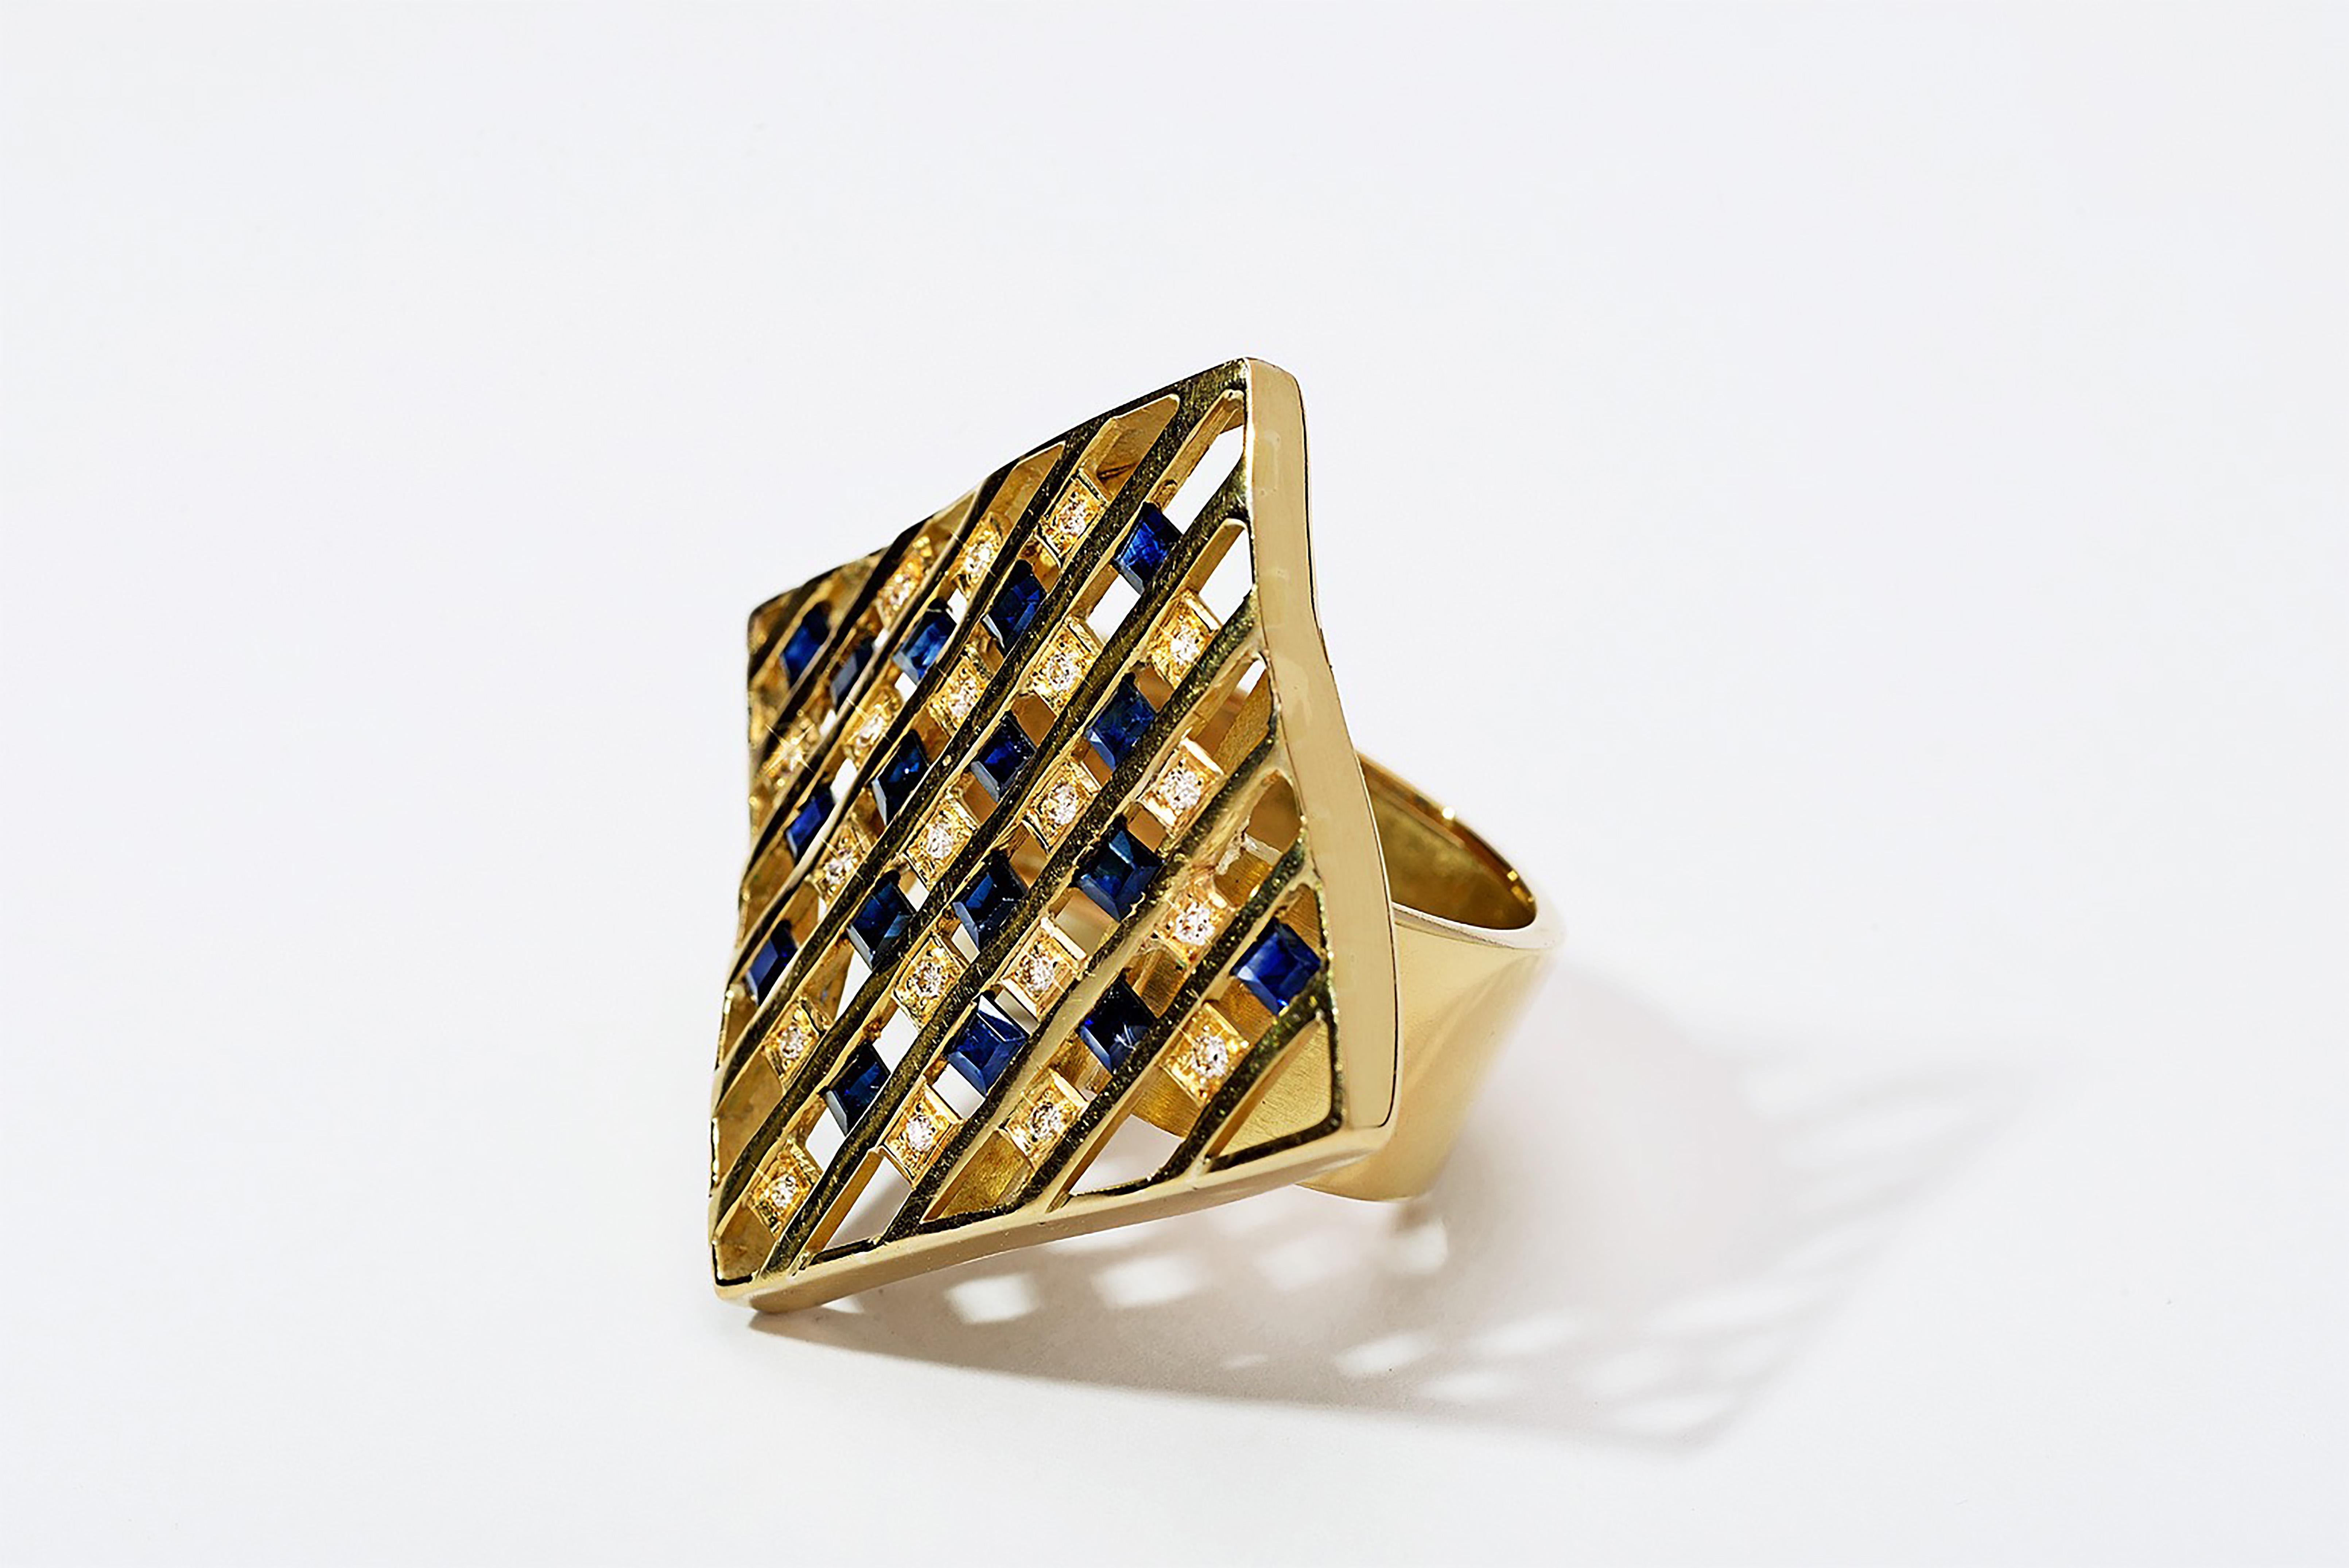 A one-of-a-kind treasure, crafted in 18k yellow gold and a combination of tension set princess-cut blue sapphire and bezel set diamonds. The rhombus shape extends loosely in fluidity with the hand's movement.

The Chao Kalfu ring is part of the